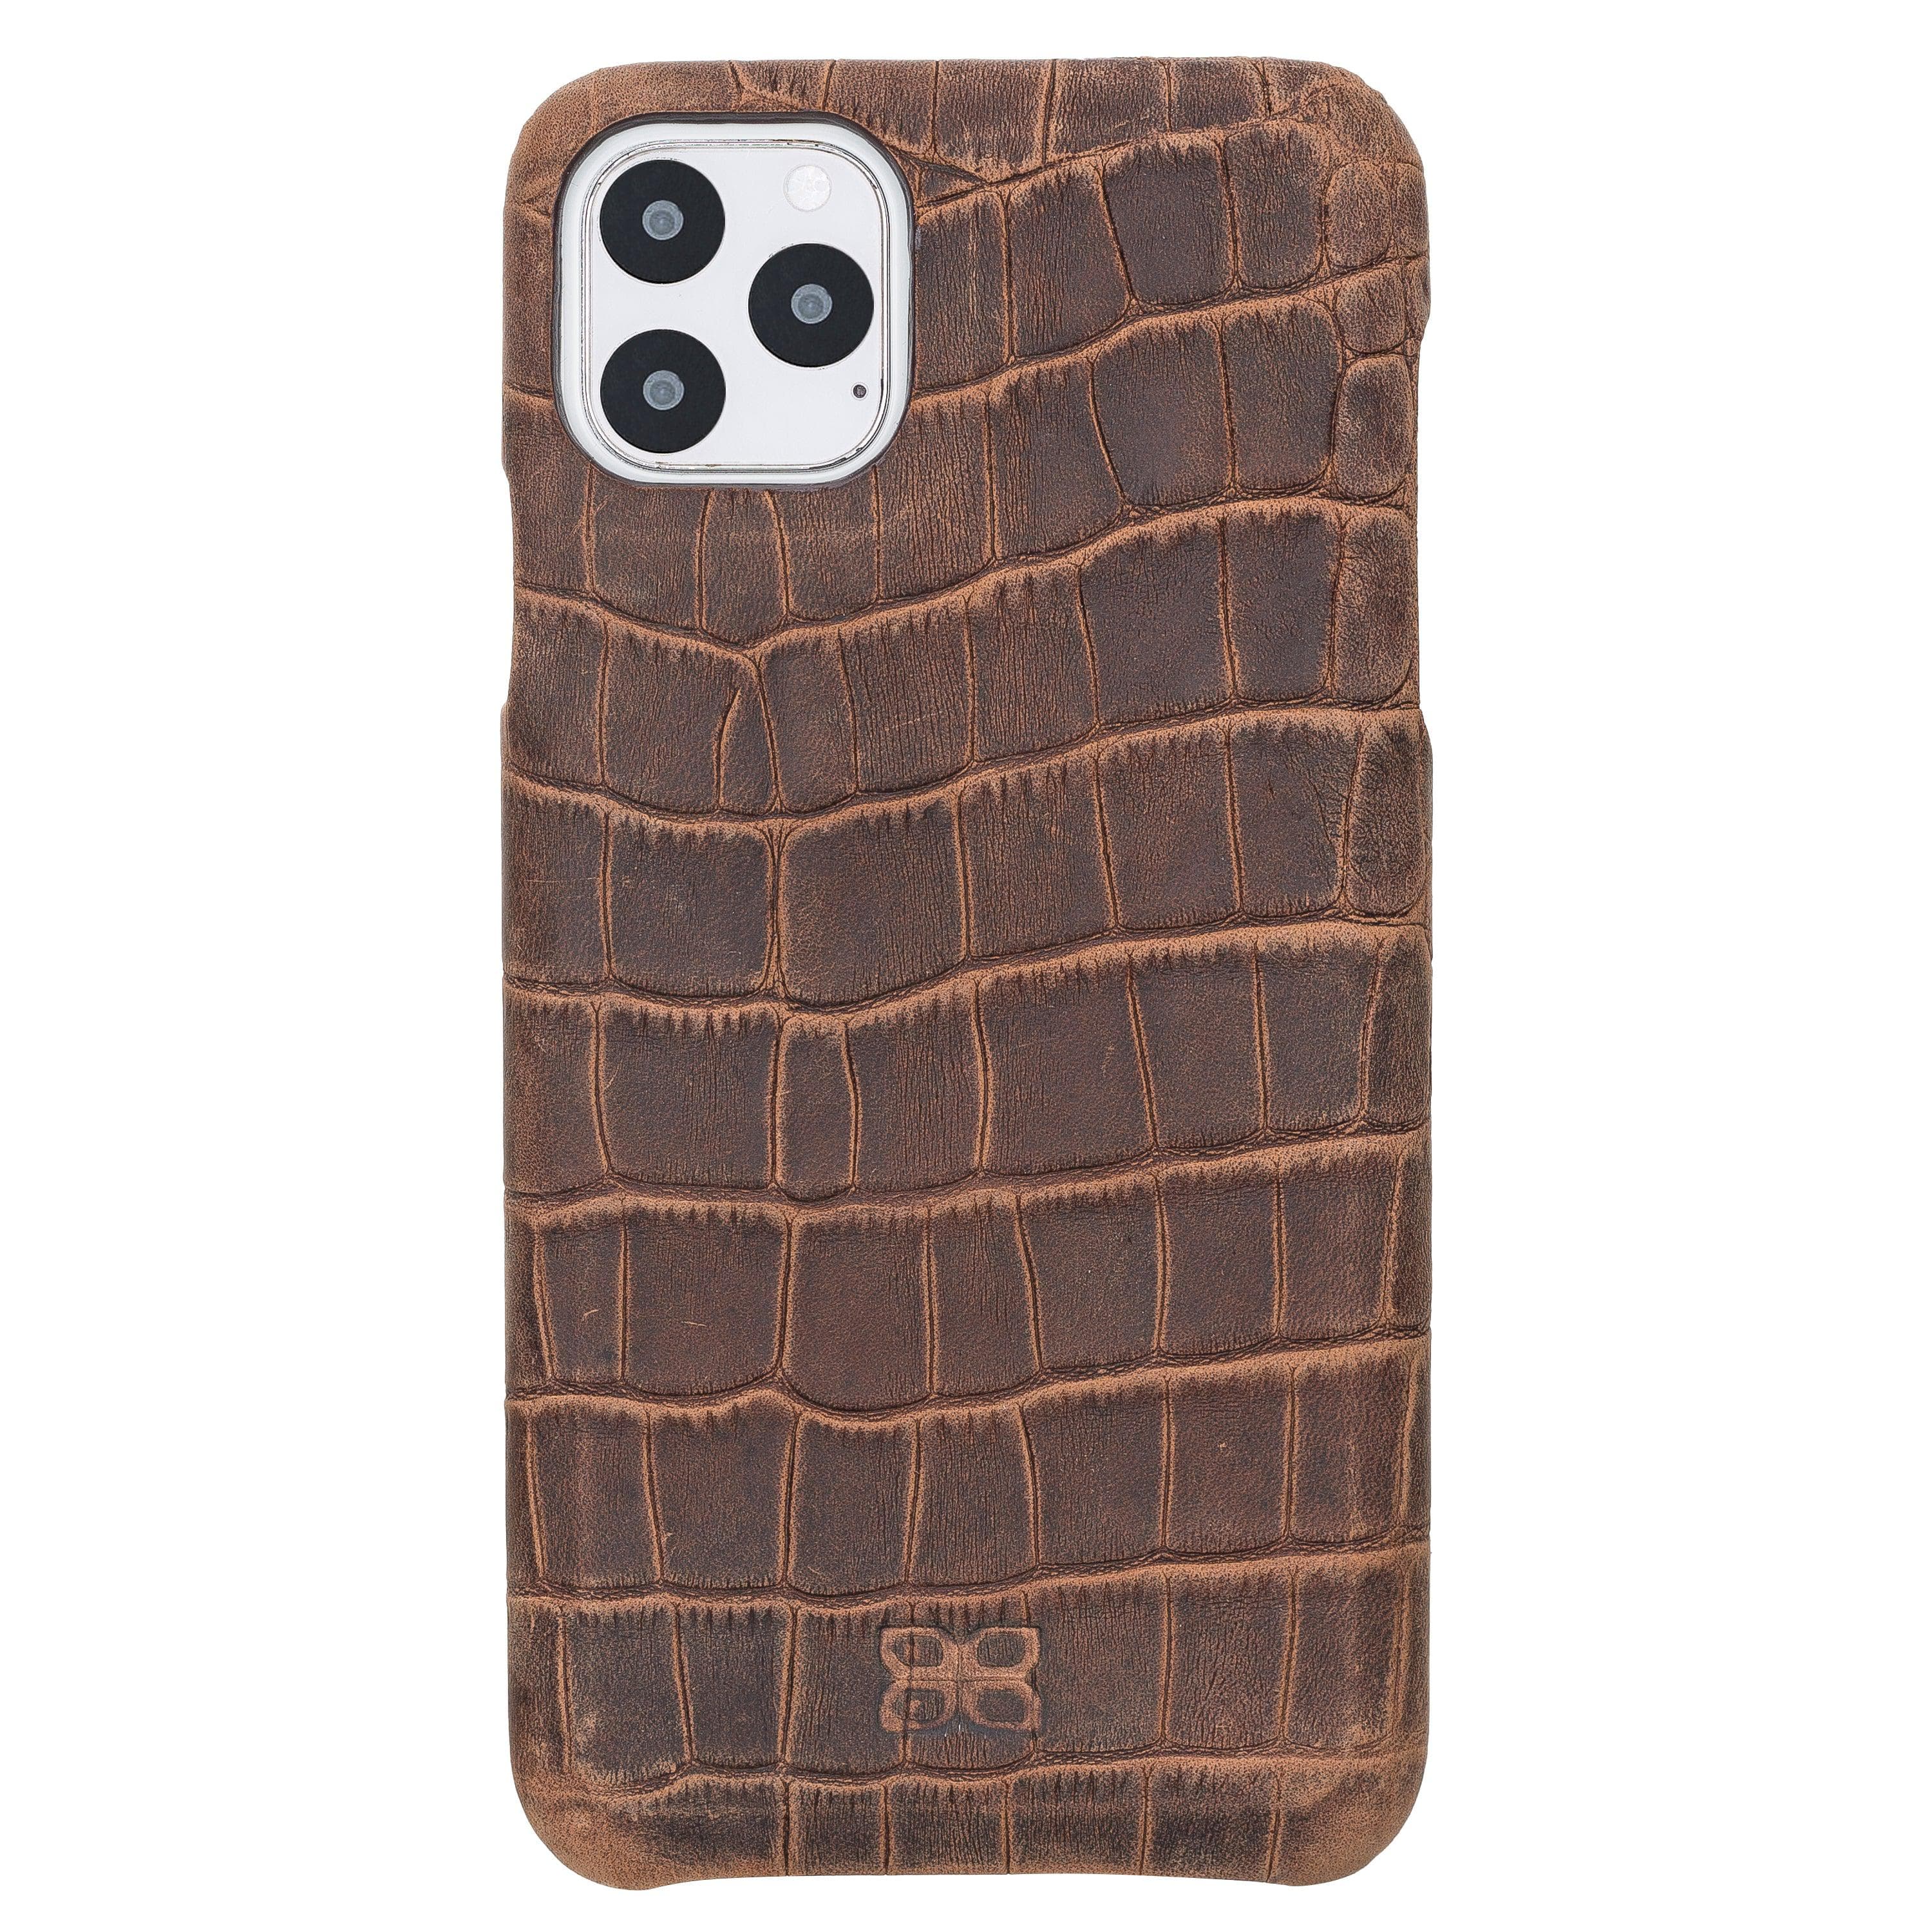 Bouletta Fully Leather Back Cover for Apple iPhone 11 Series İPhone 11 Pro Max / Dragon Brown Bouletta LTD